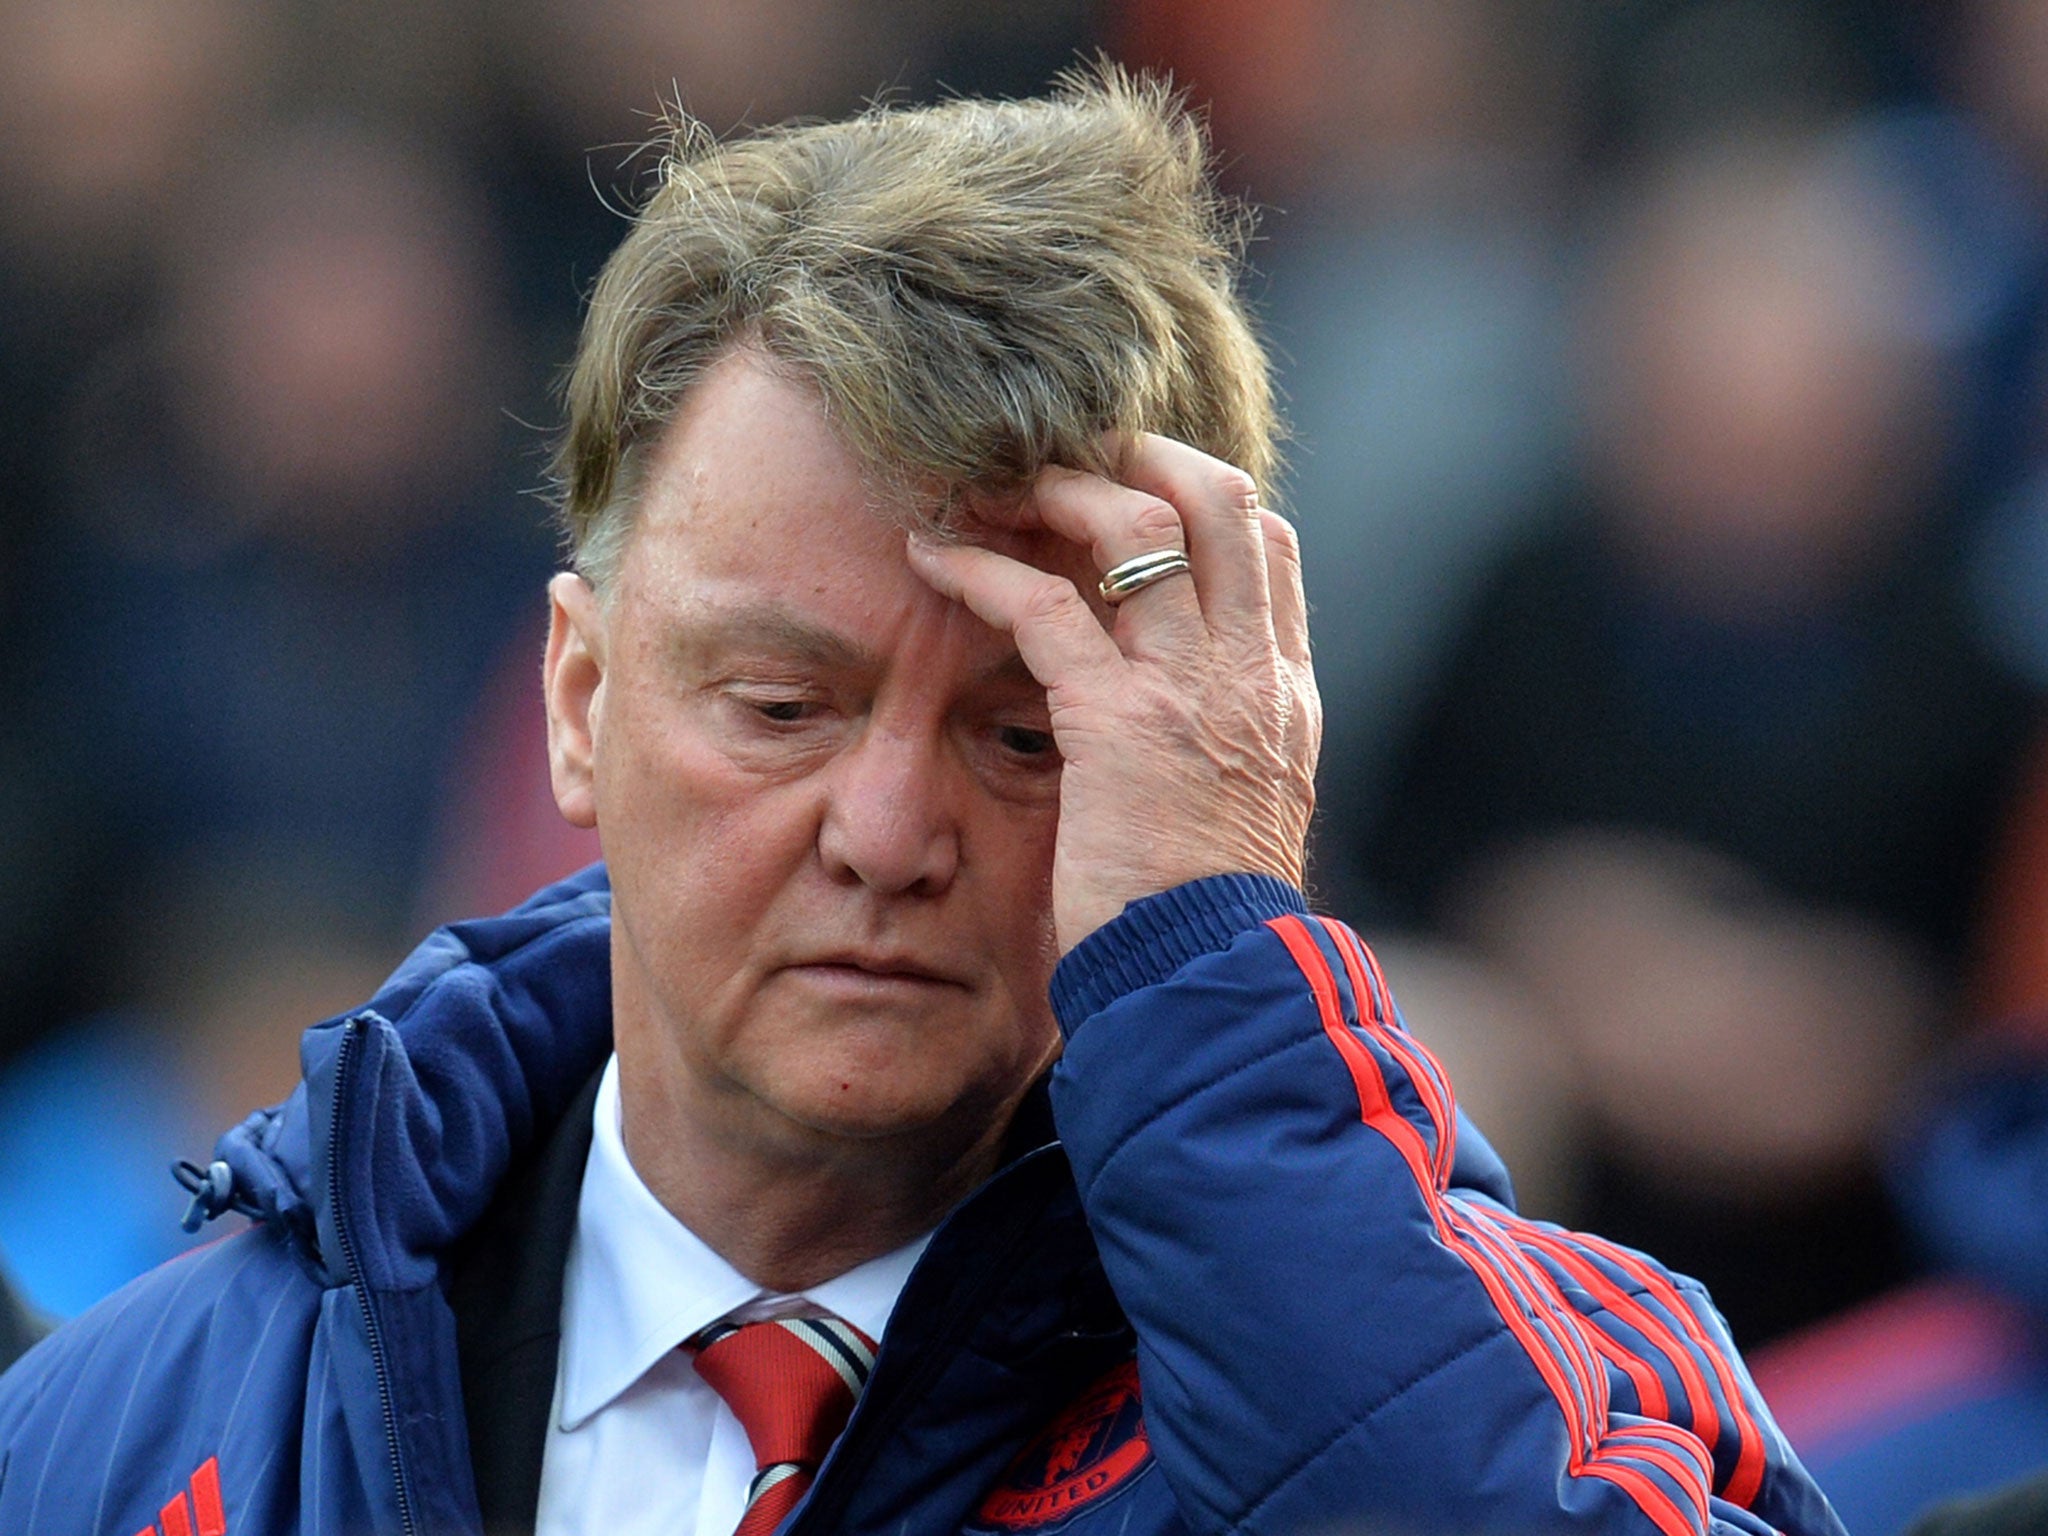 Manchester United manager Louis van Gaal gave no assurances he would remain manager